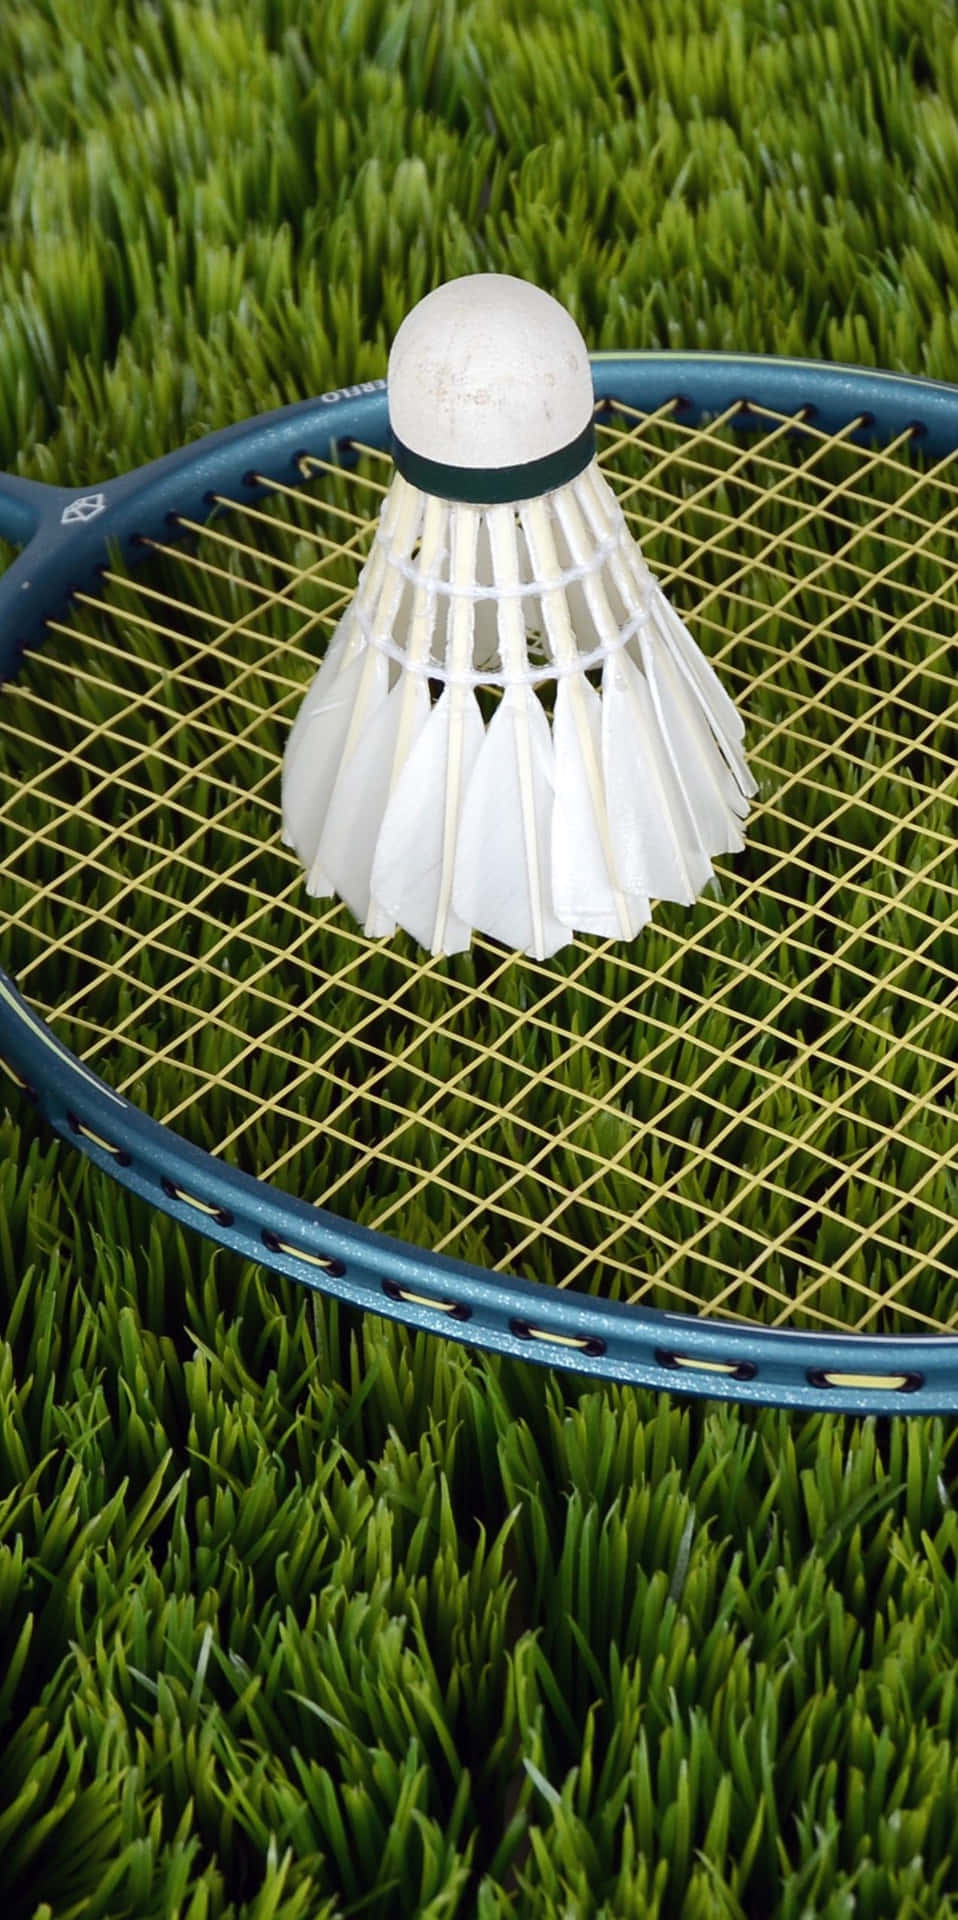 Grass Field With Racket And Shuttlecock Pixel 3 Badminton Background